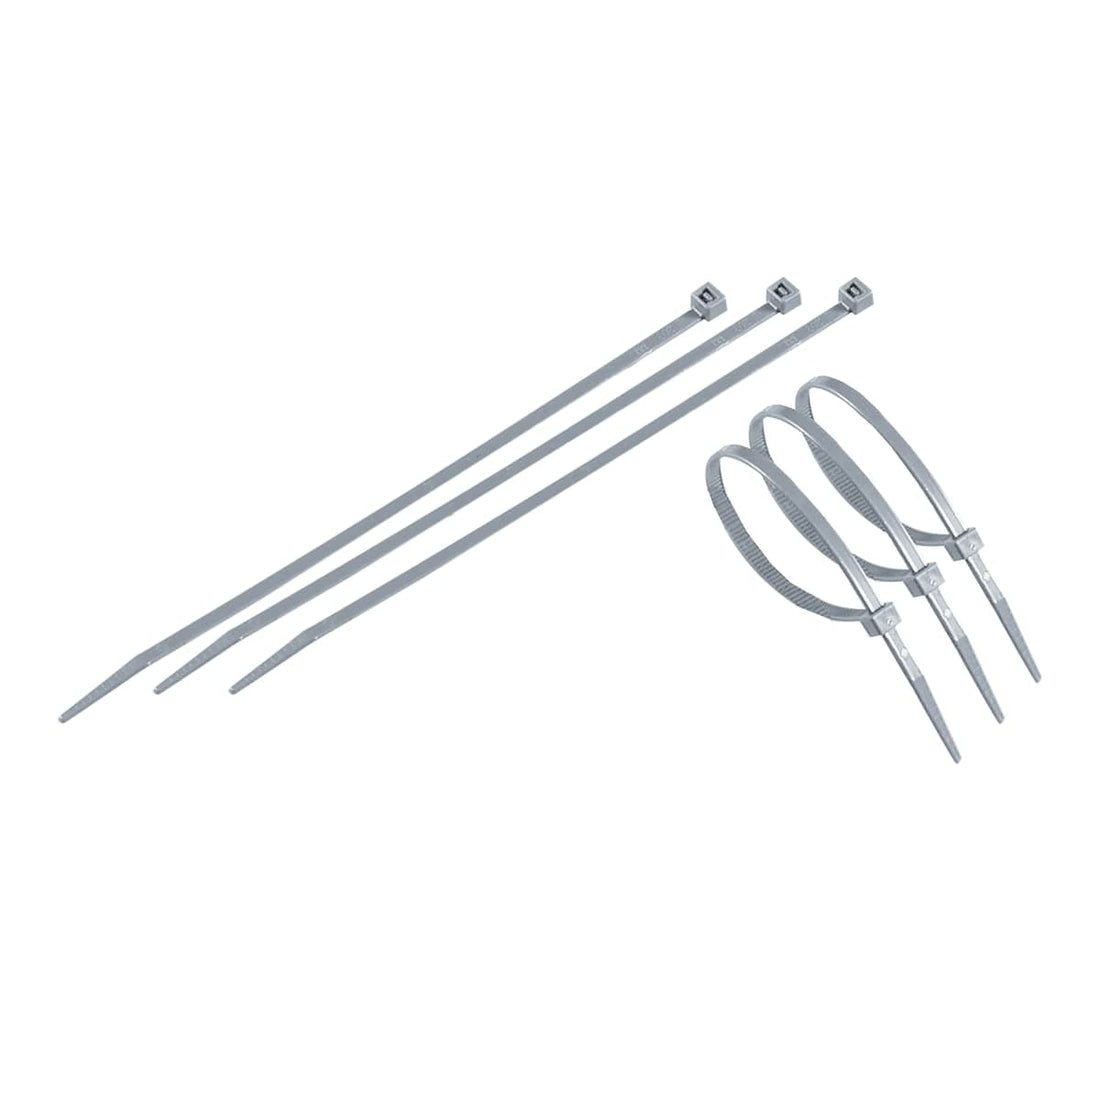 50 CABLE TIES 20 CM SILVER - best price from Maltashopper.com BR510009359